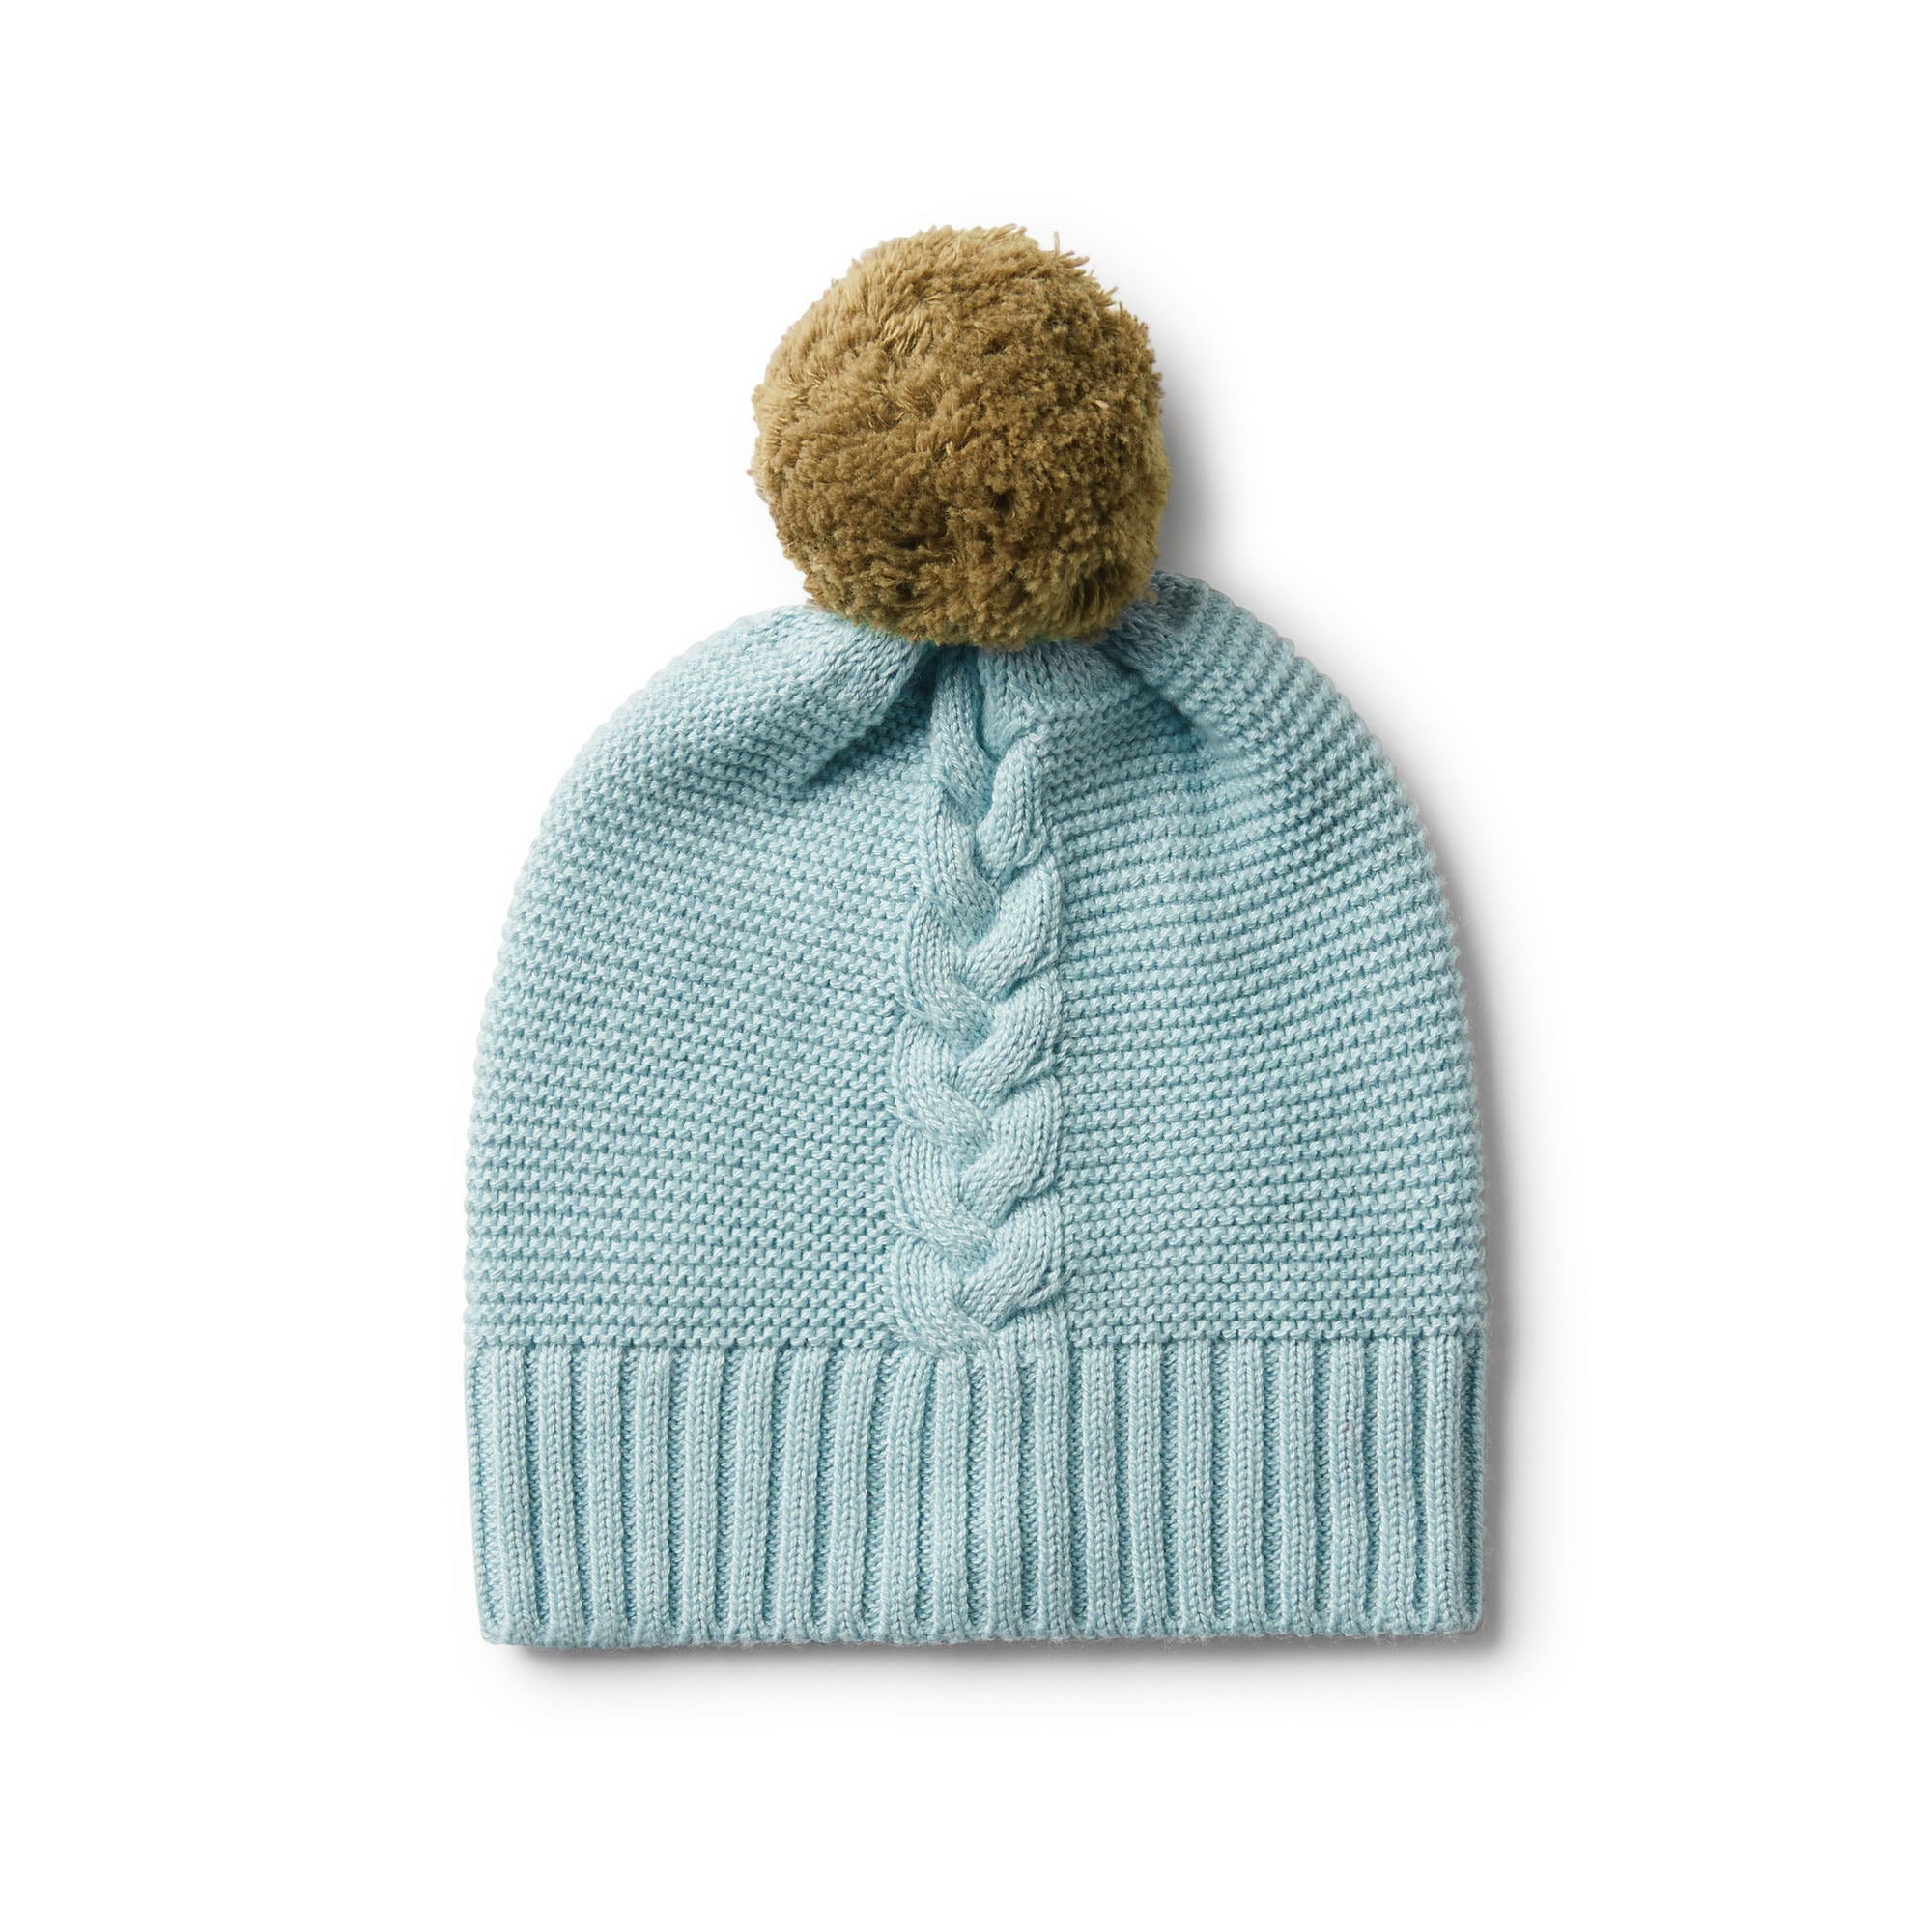 SEAFOAM CABLE KNIT HAT WITH POM POM - Wilson and Frenchy